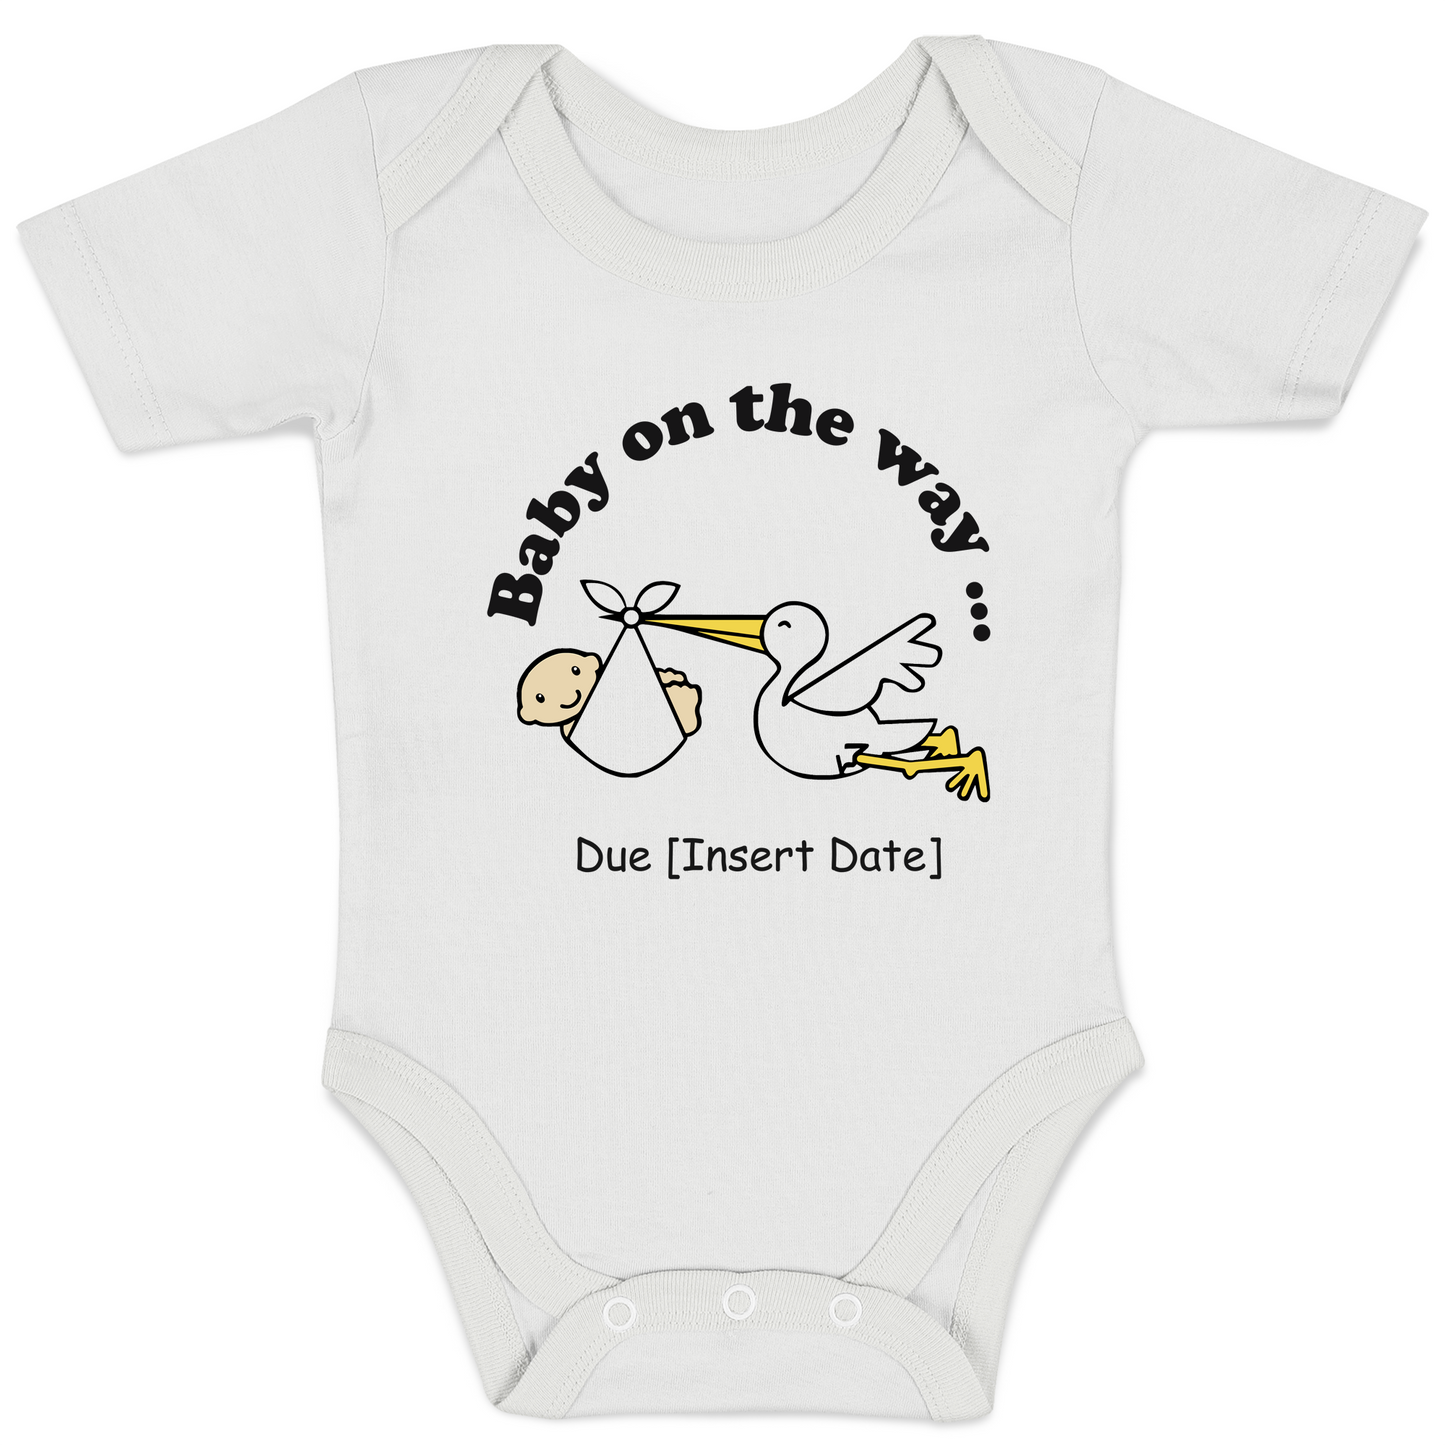 [Personalized] Endanzoo Pregnancy Announcement Baby Reveal Organic Baby Bodysuit - Baby on the way